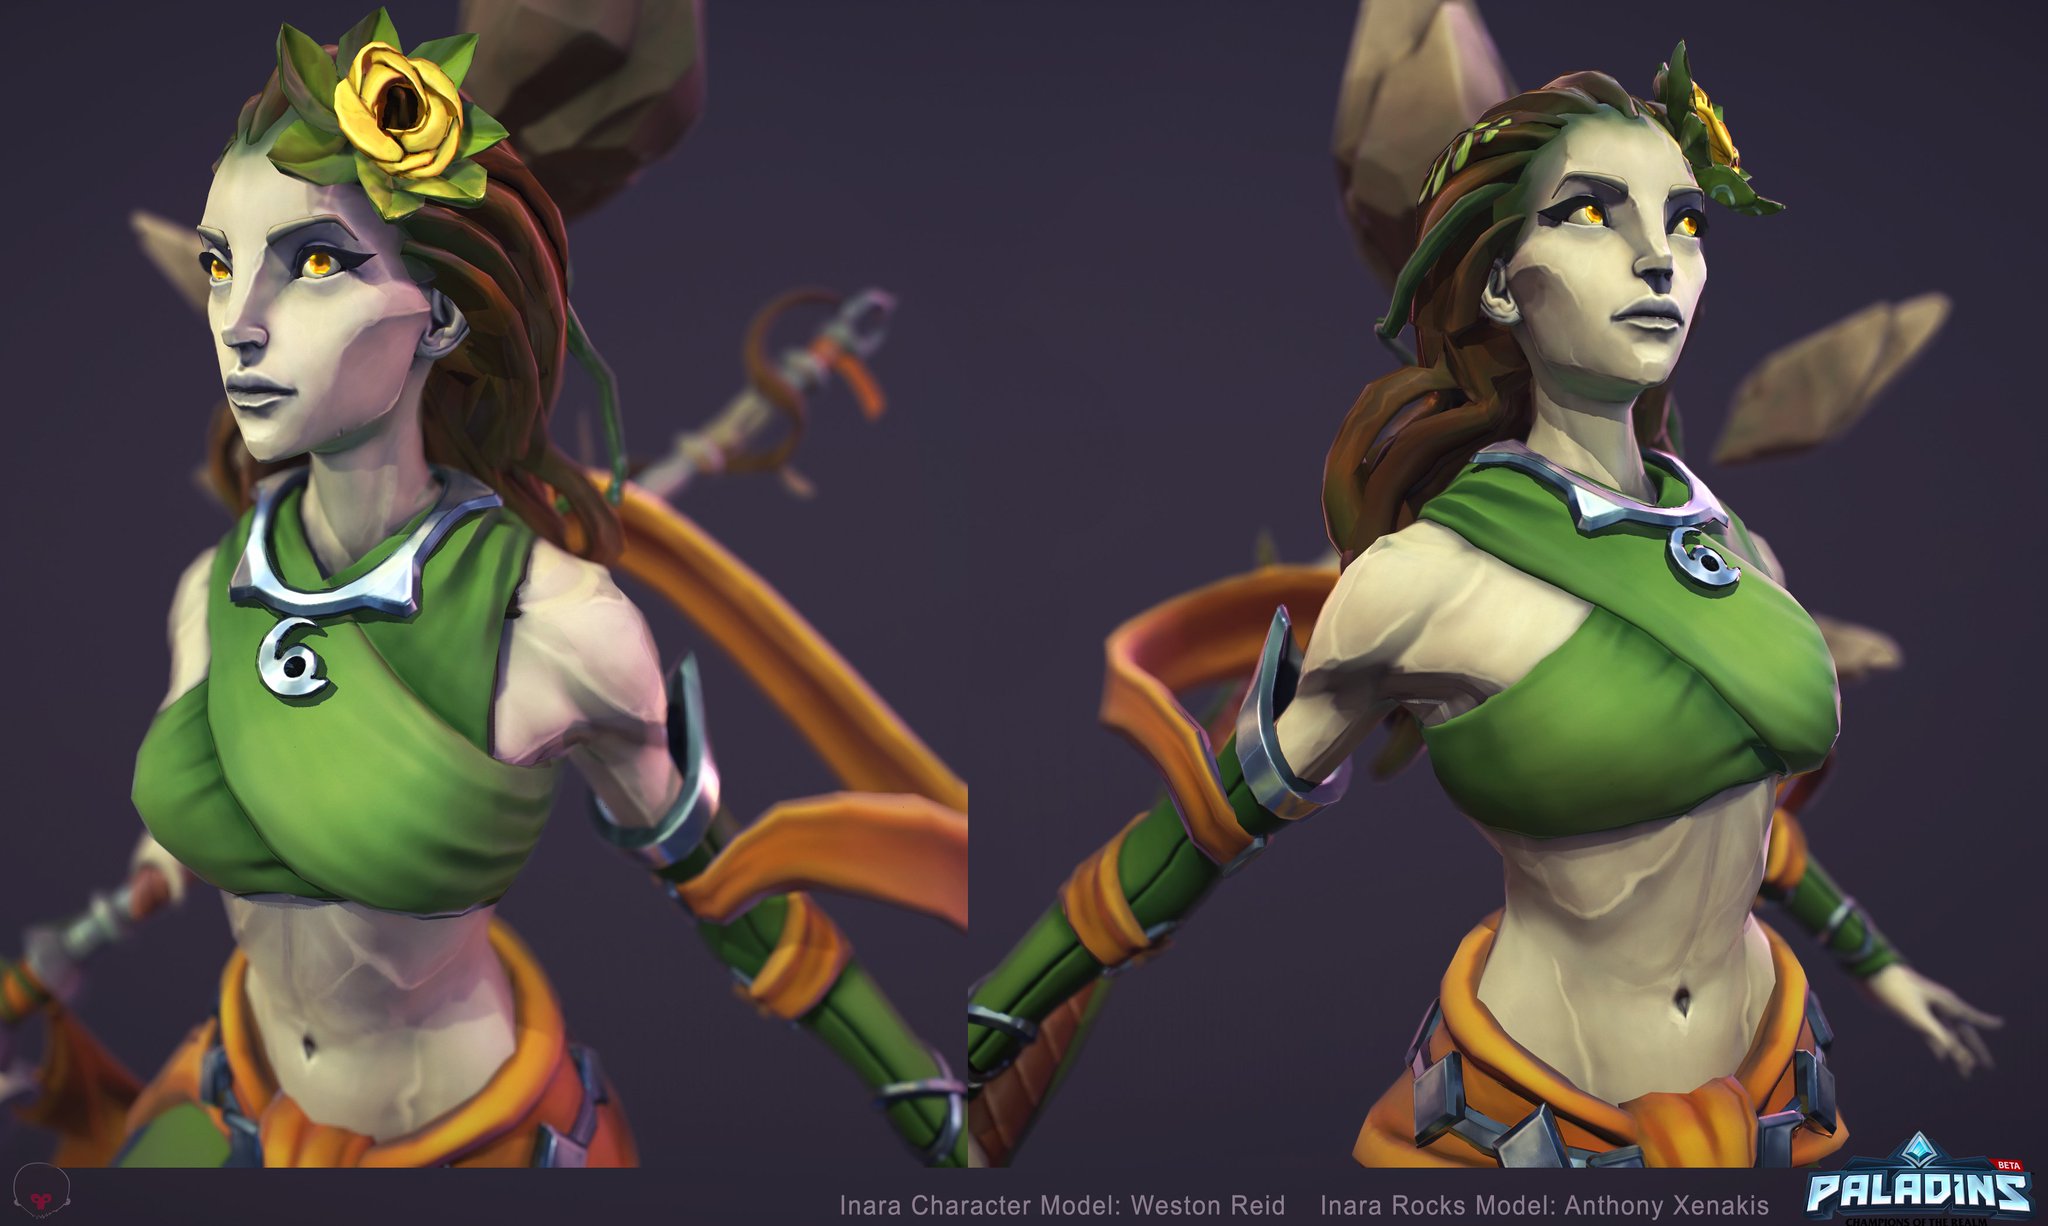 “More action shots from our latest champion: Inara, the Stone Warden! https...